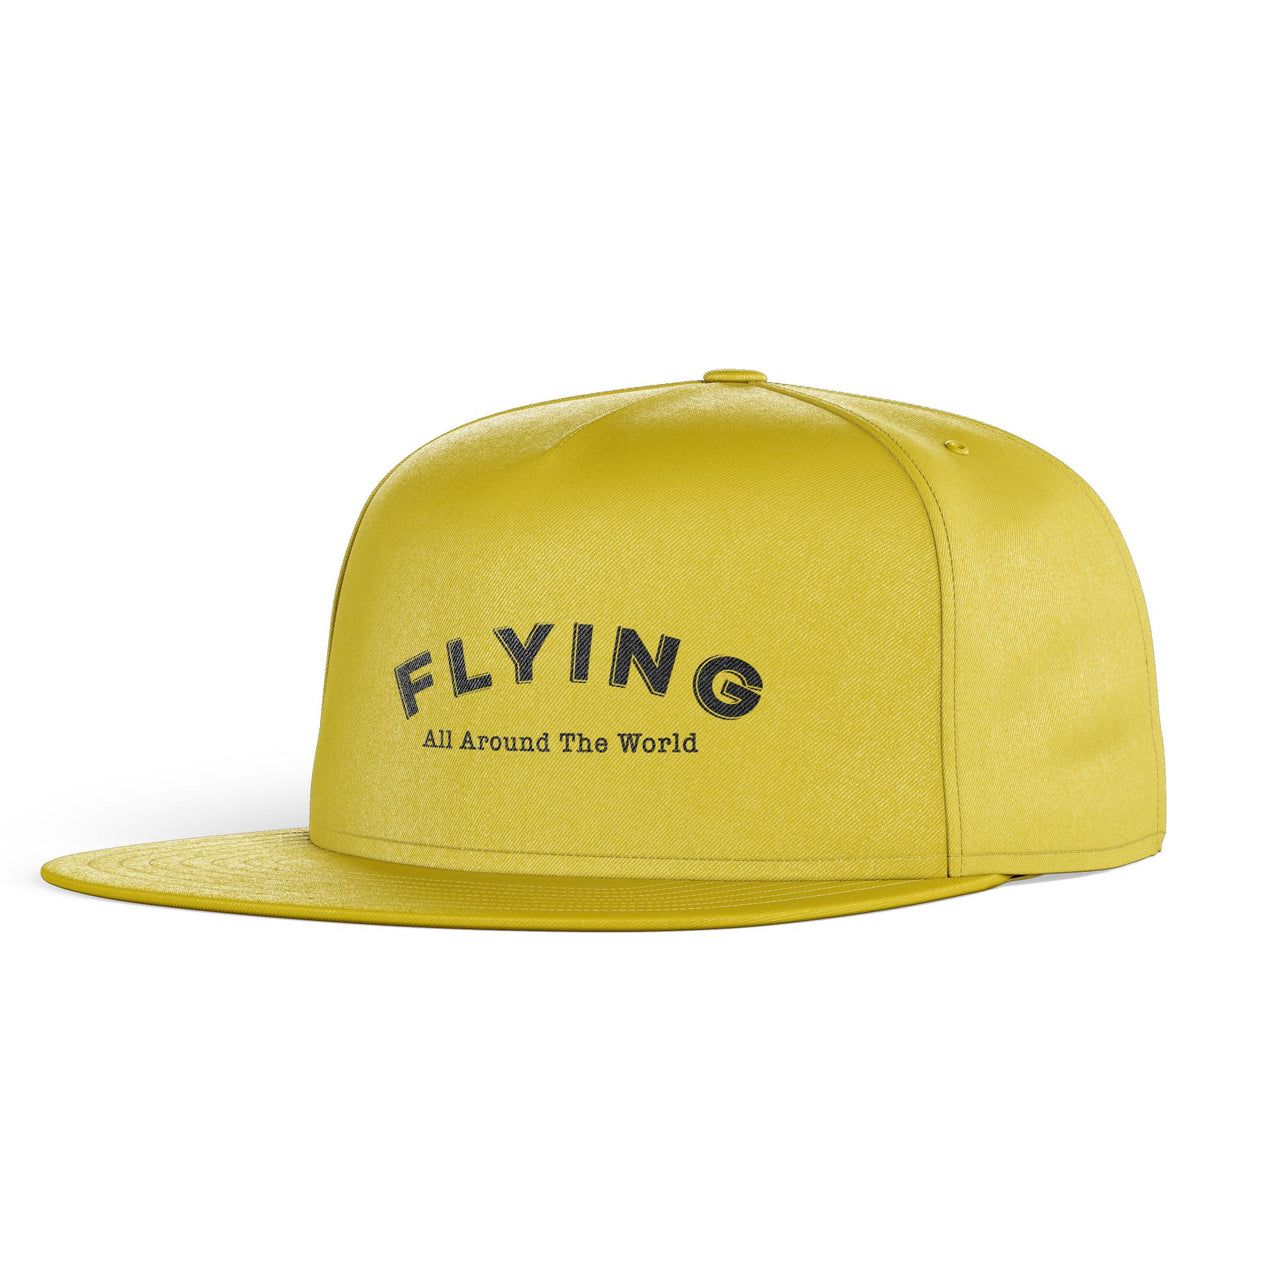 Flying All Around The World Designed Snapback Caps & Hats